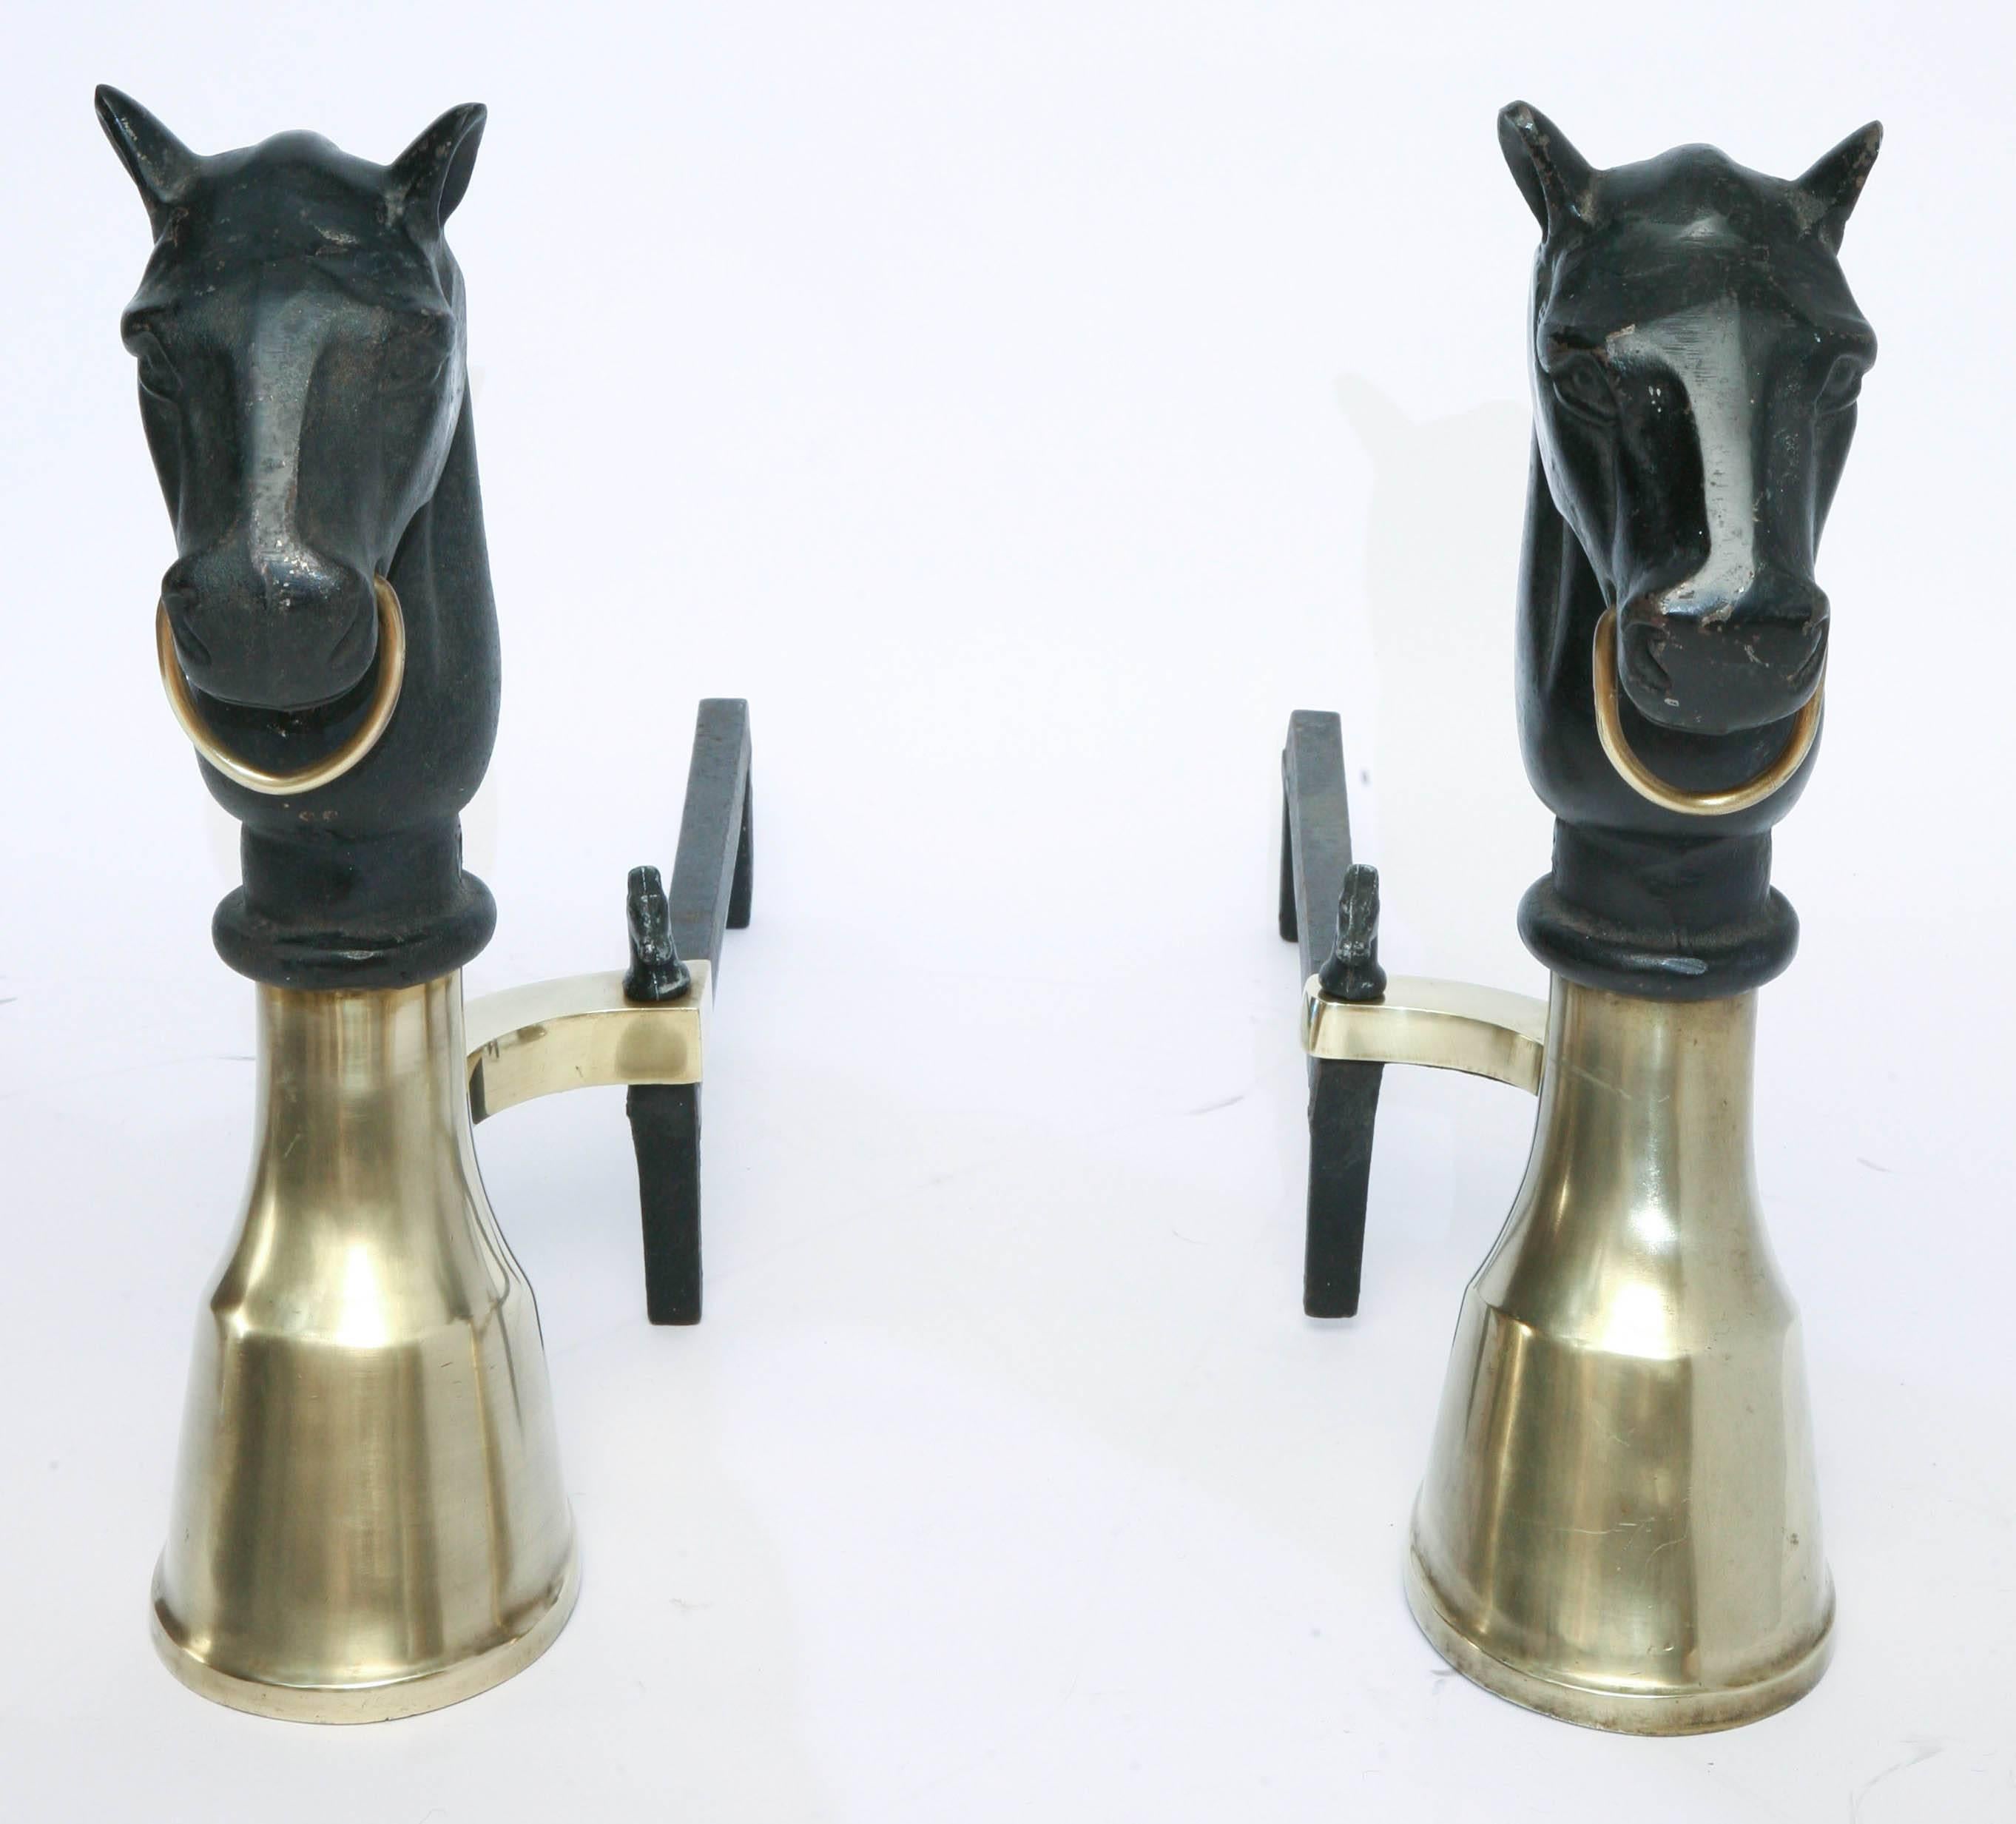 Handsome pair of equestrian andirons consisting of a black iron horse head on a solid brass hoof and having iron horse head finials at base.